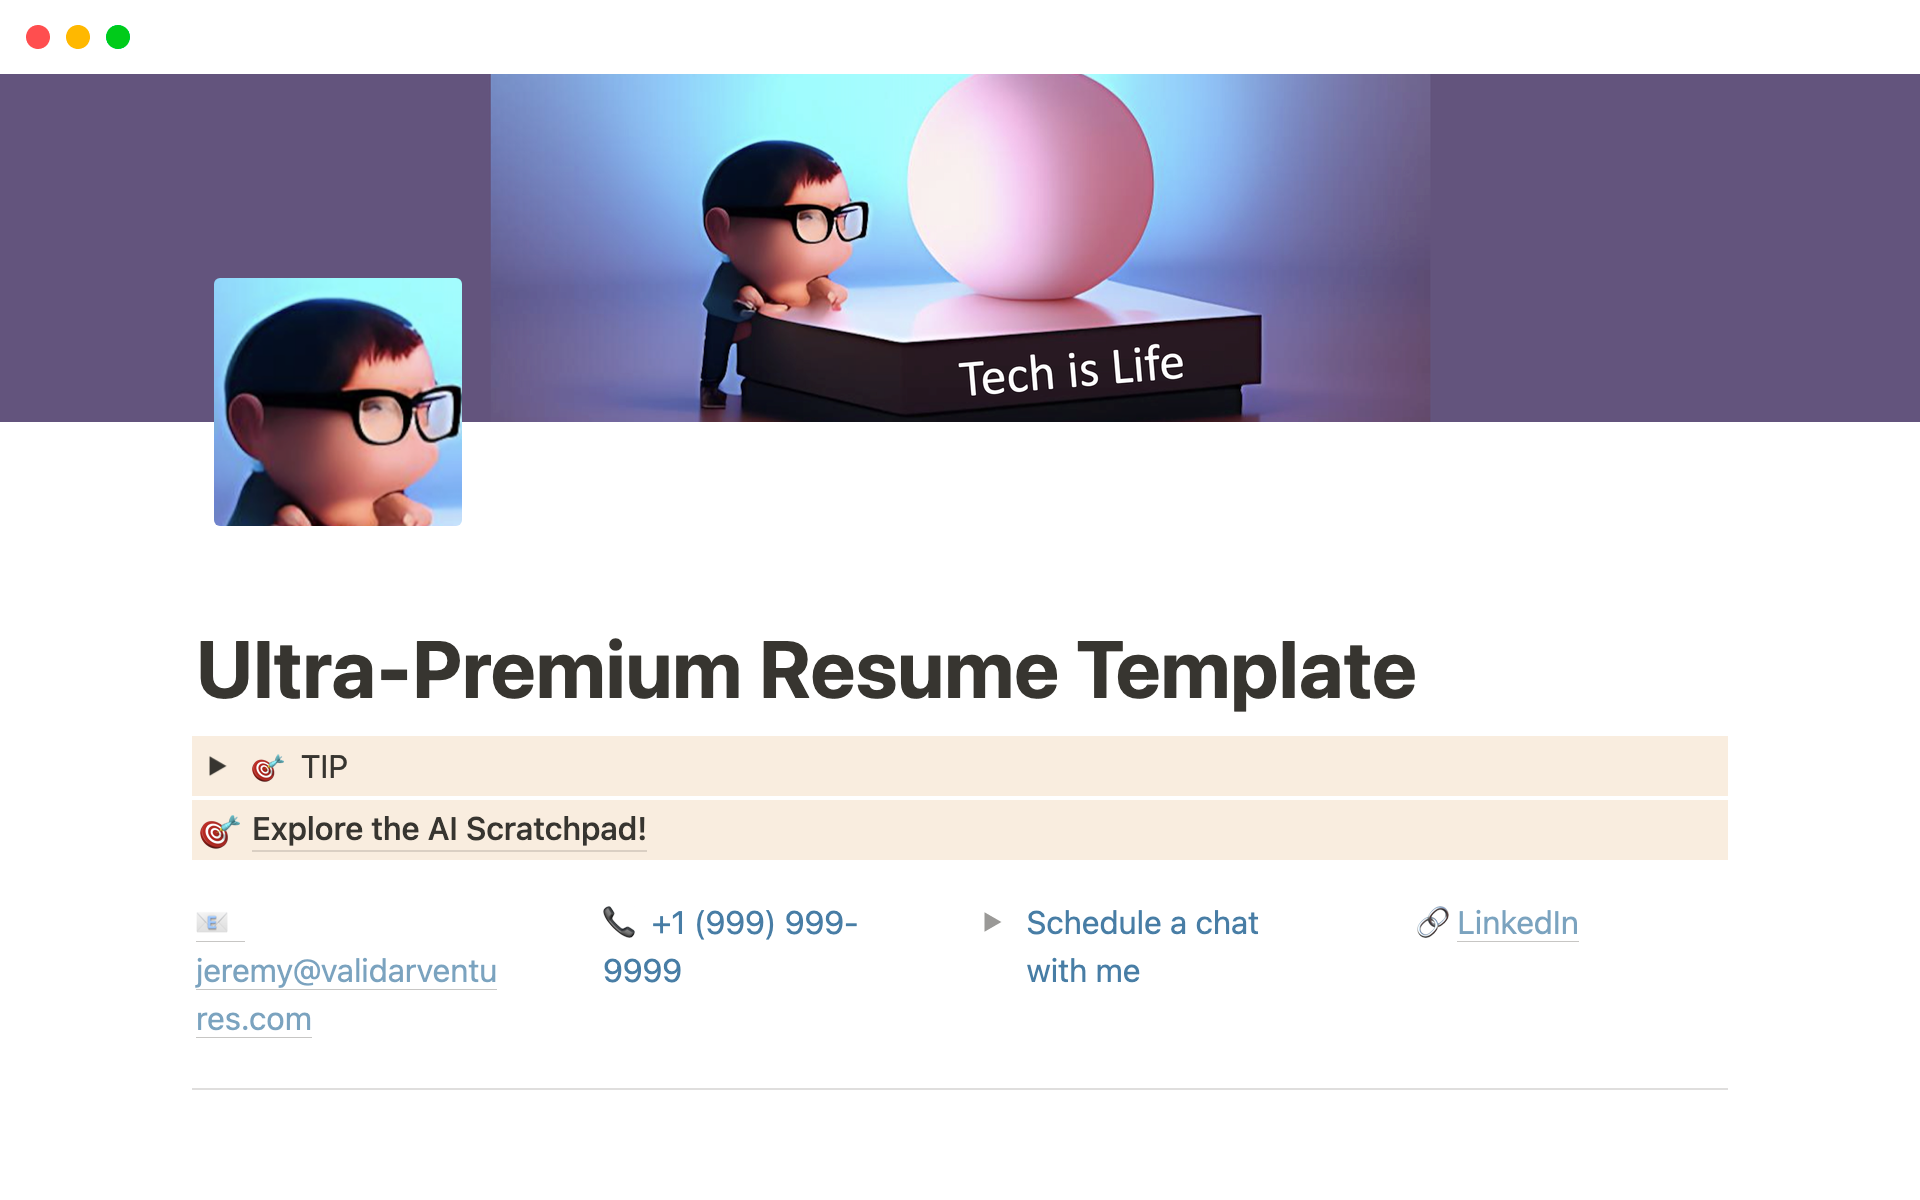 Empower your job hunt with our premium resume template that provides examples, tips and uses AI for incredible results.